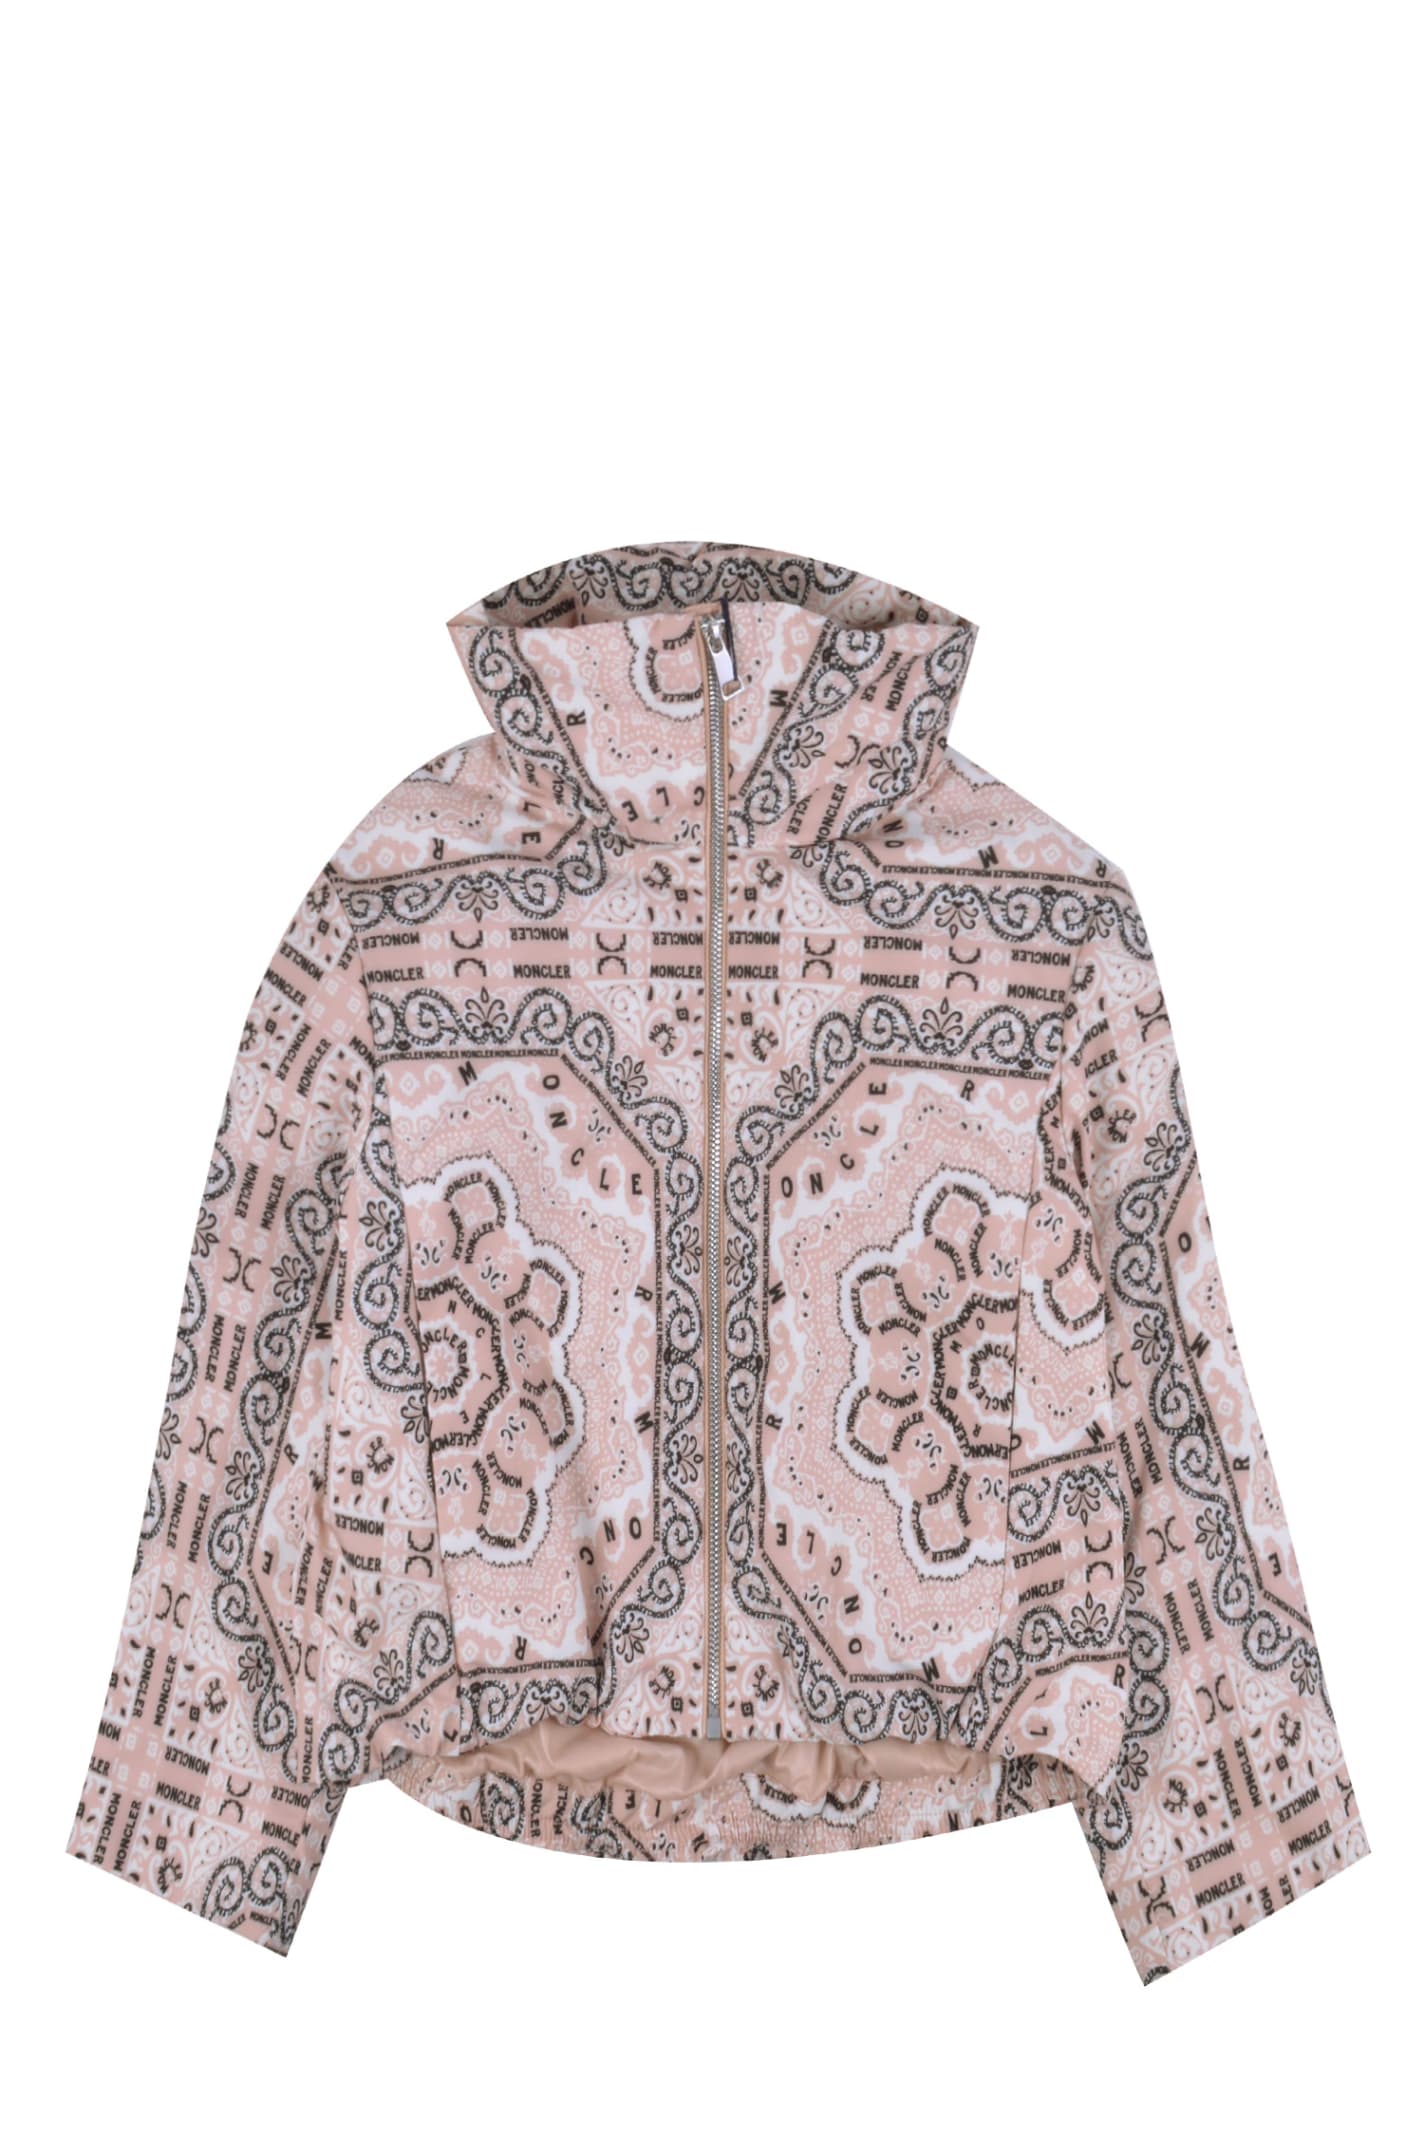 Moncler Jacket With Print